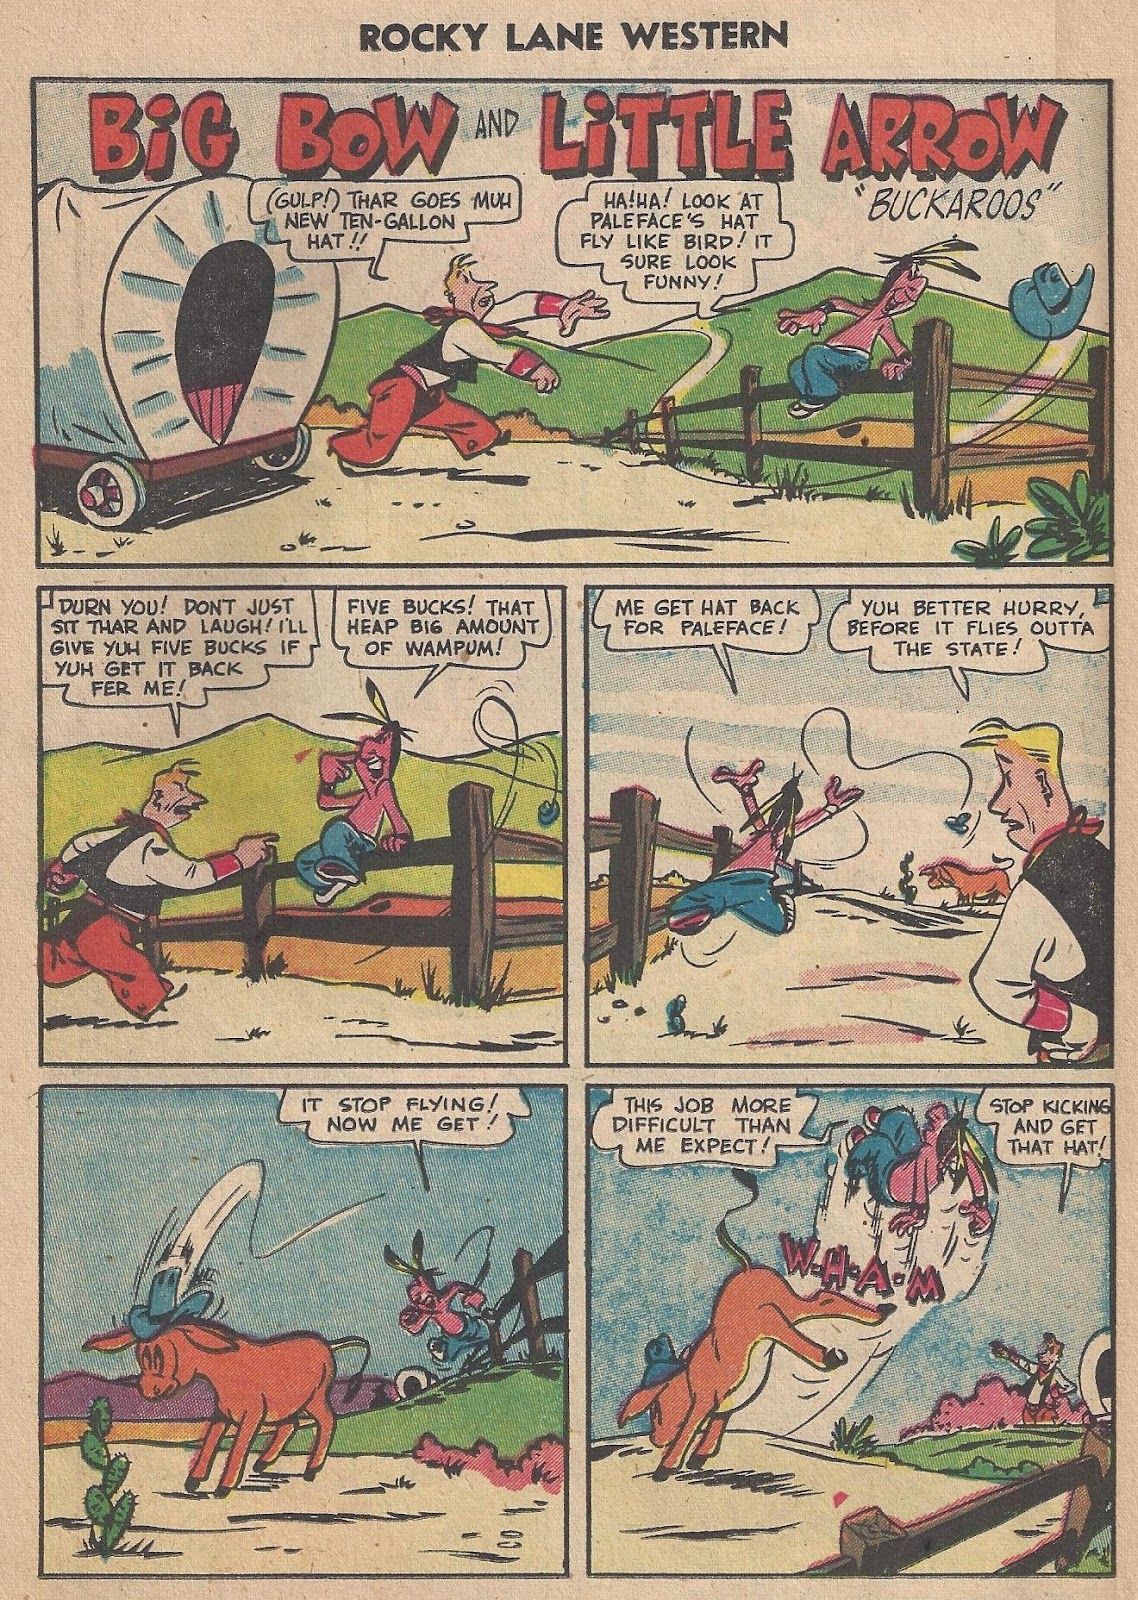 Rocky Lane Western (1954) issue 63 - Page 14